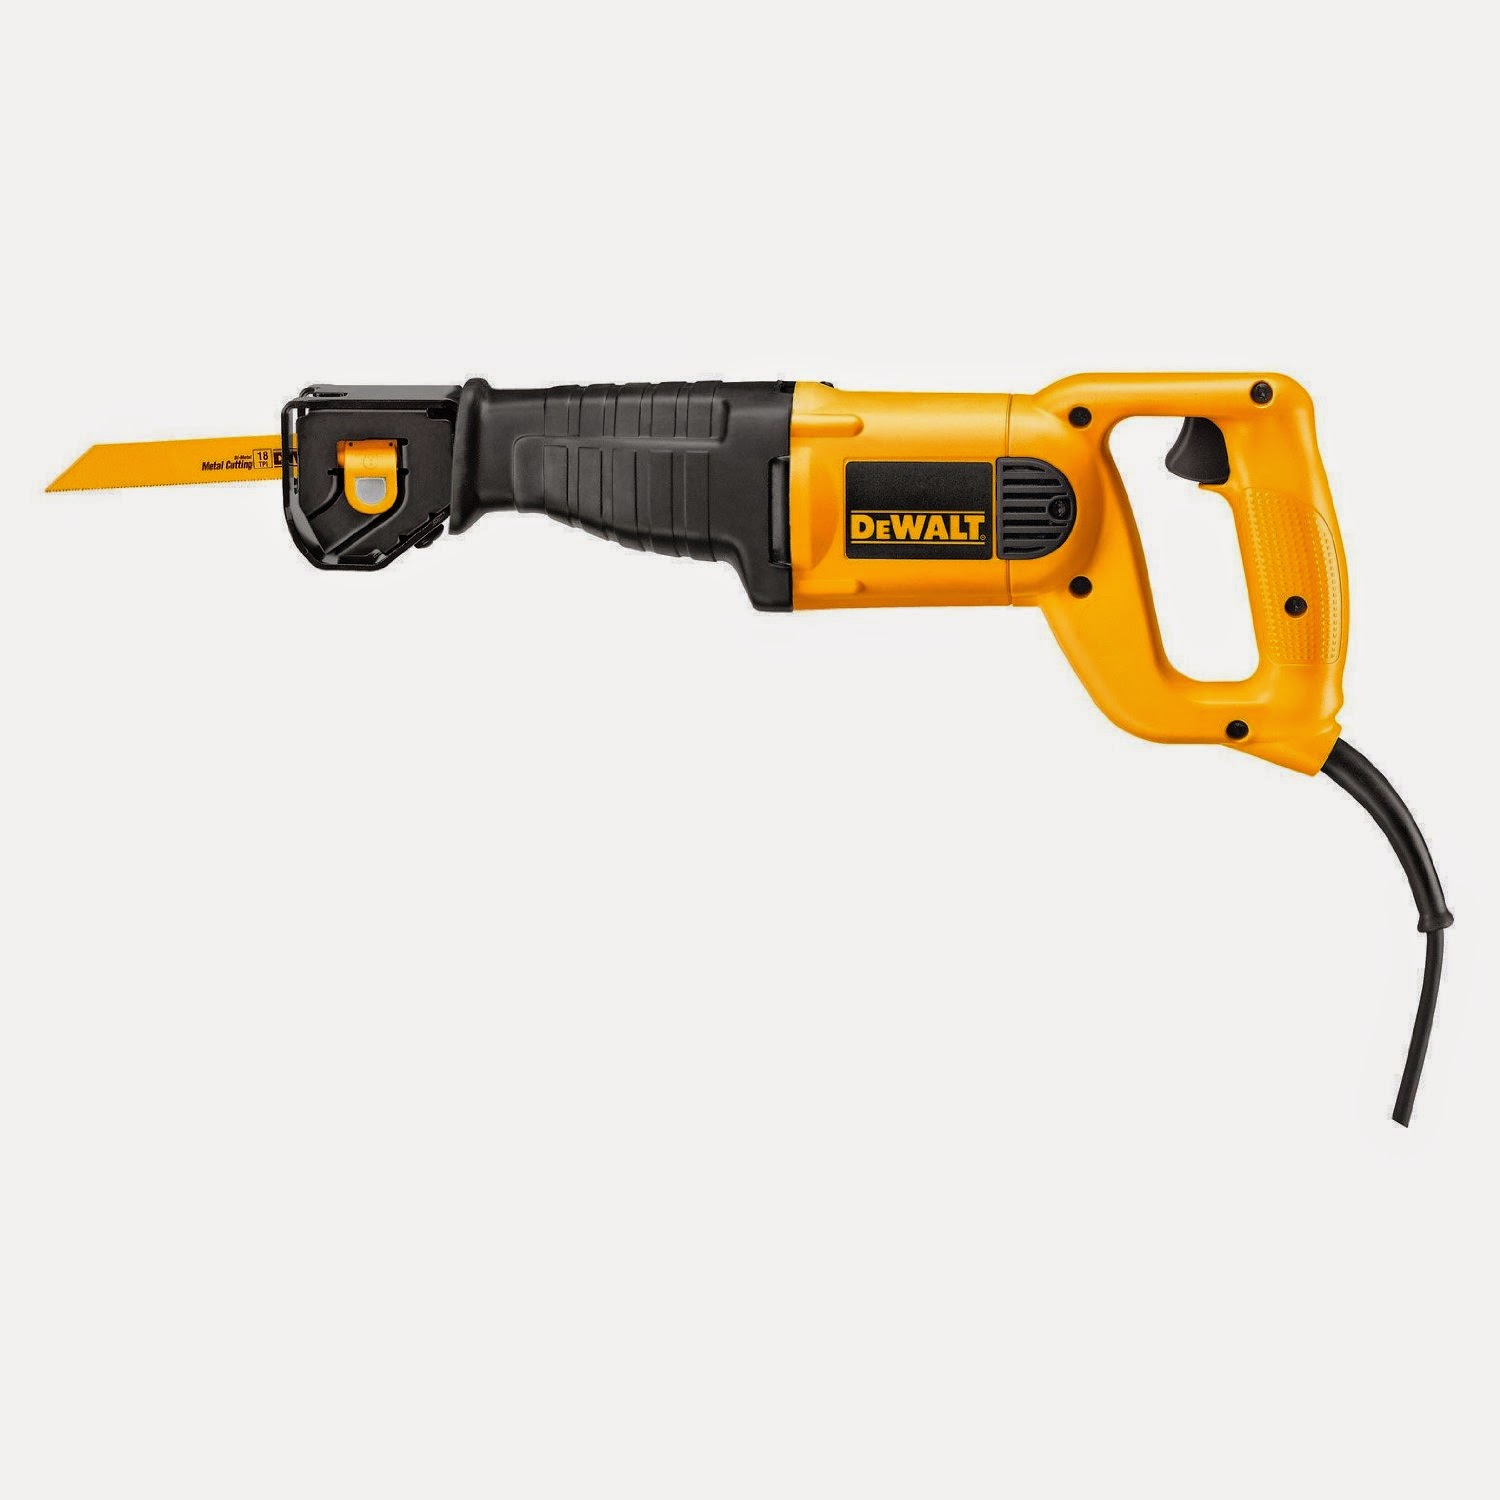 DEWALT DW304PK Reciprocating Saw, heavy duty, variable speed control, up to 2800 spm, 1 1/8" stroke length, keyless lever action blade clamp with 4 positions